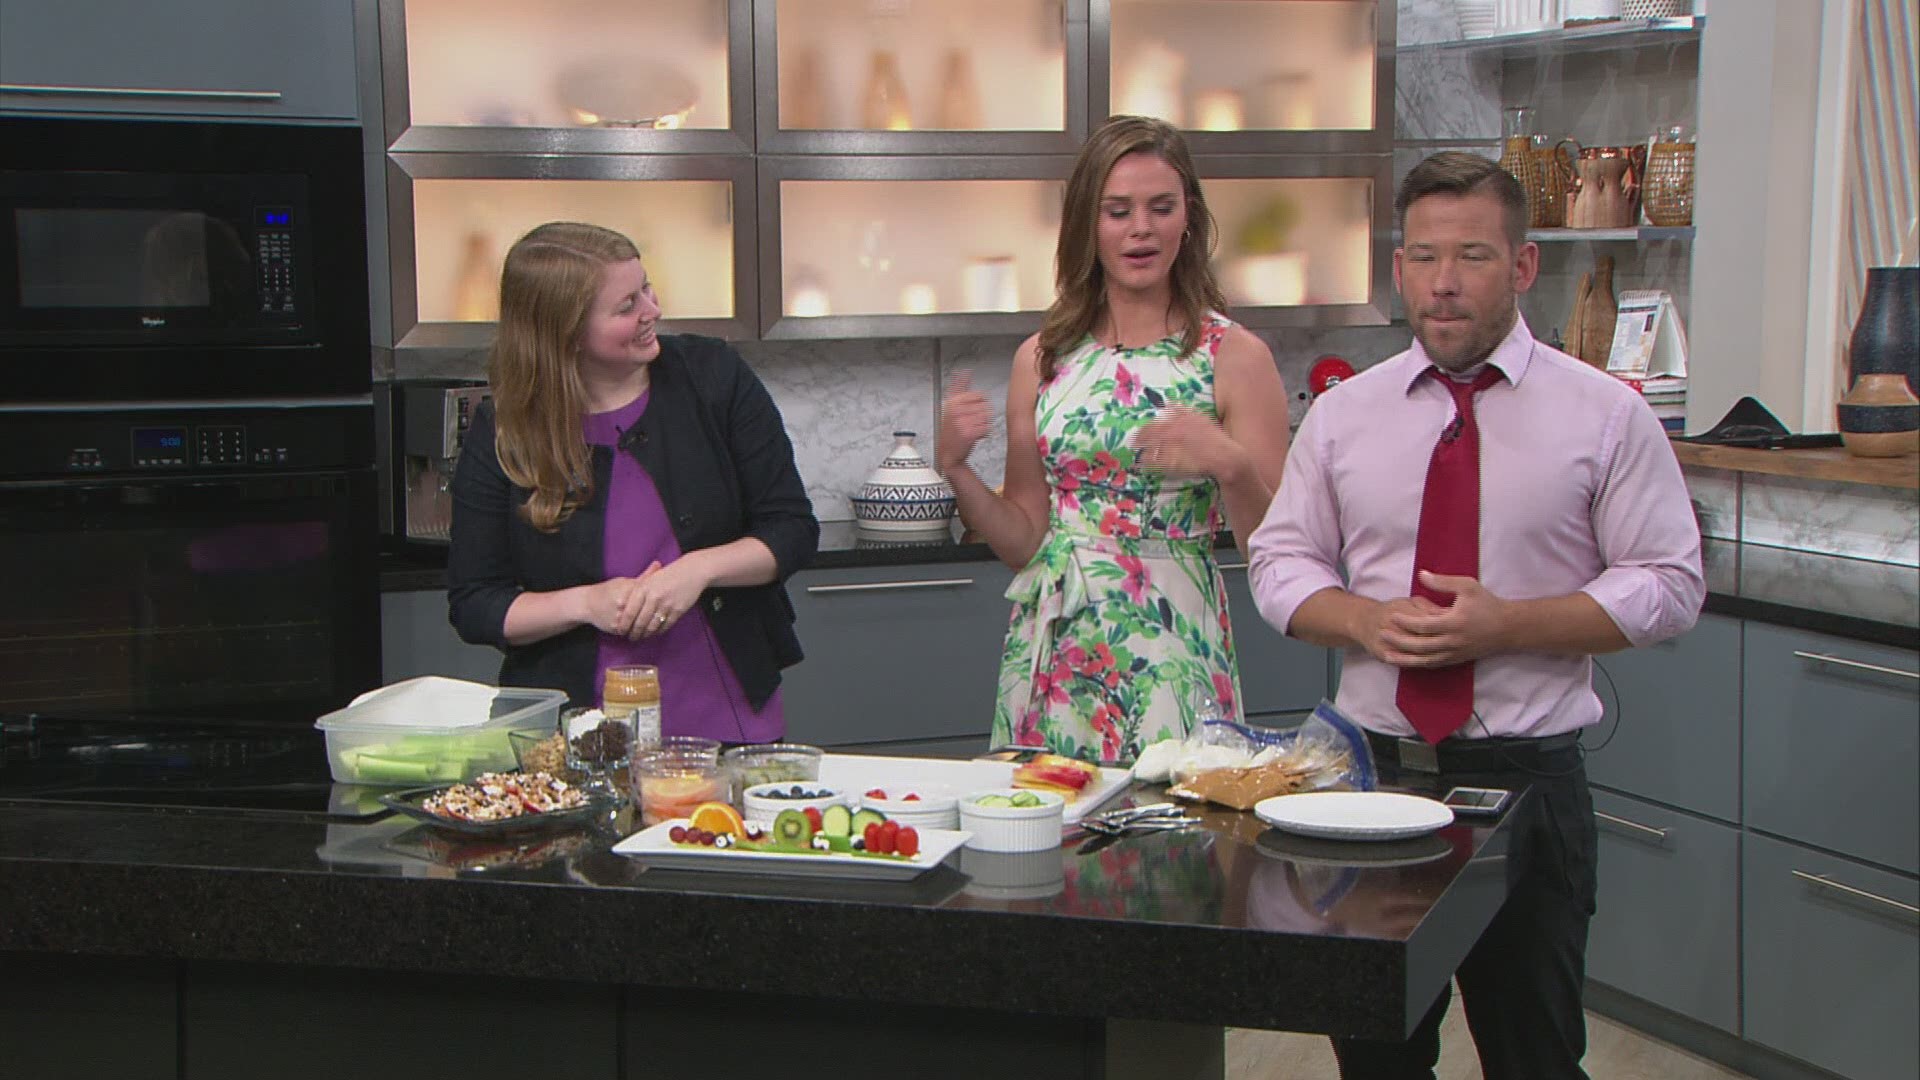 Looking for healthy snack options for your kids this summer? Melissa Bradley, RD, LD from Hy-Vee Savage has two kid-friendly recipes in this week's KARE in the Kitchen with Alicia Lewis and Sven Sundgaard. https://kare11.tv/2KjgvaF